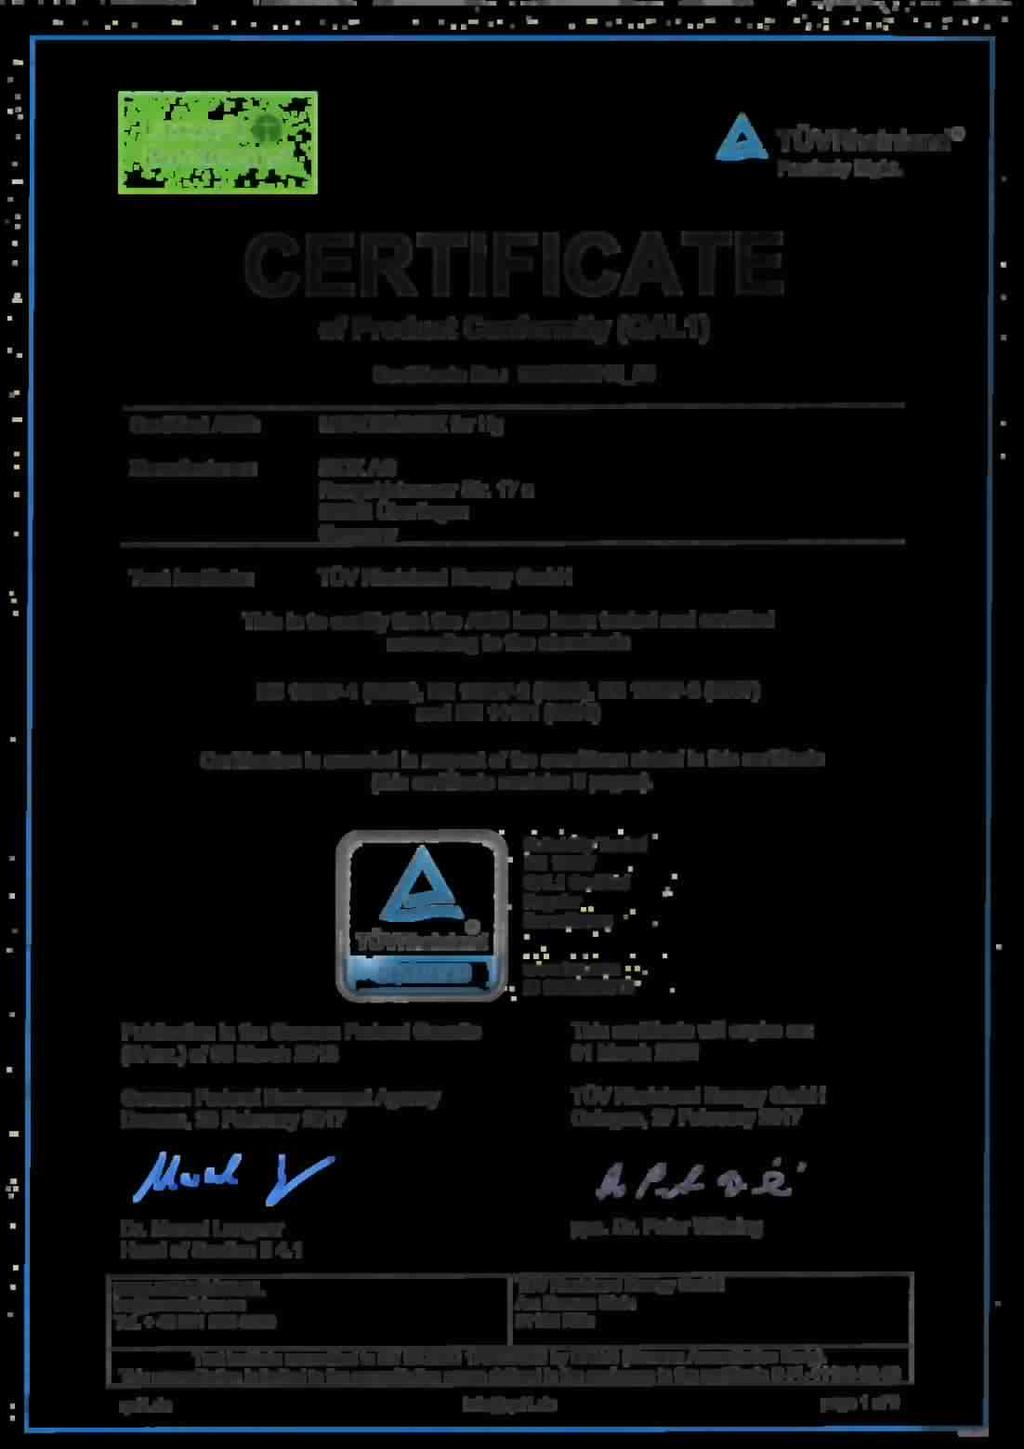 and EN 14181 (2004) Certification is awarded in respect of the conditions stated in this ceriificate (this ceriificate contains 9 pages).